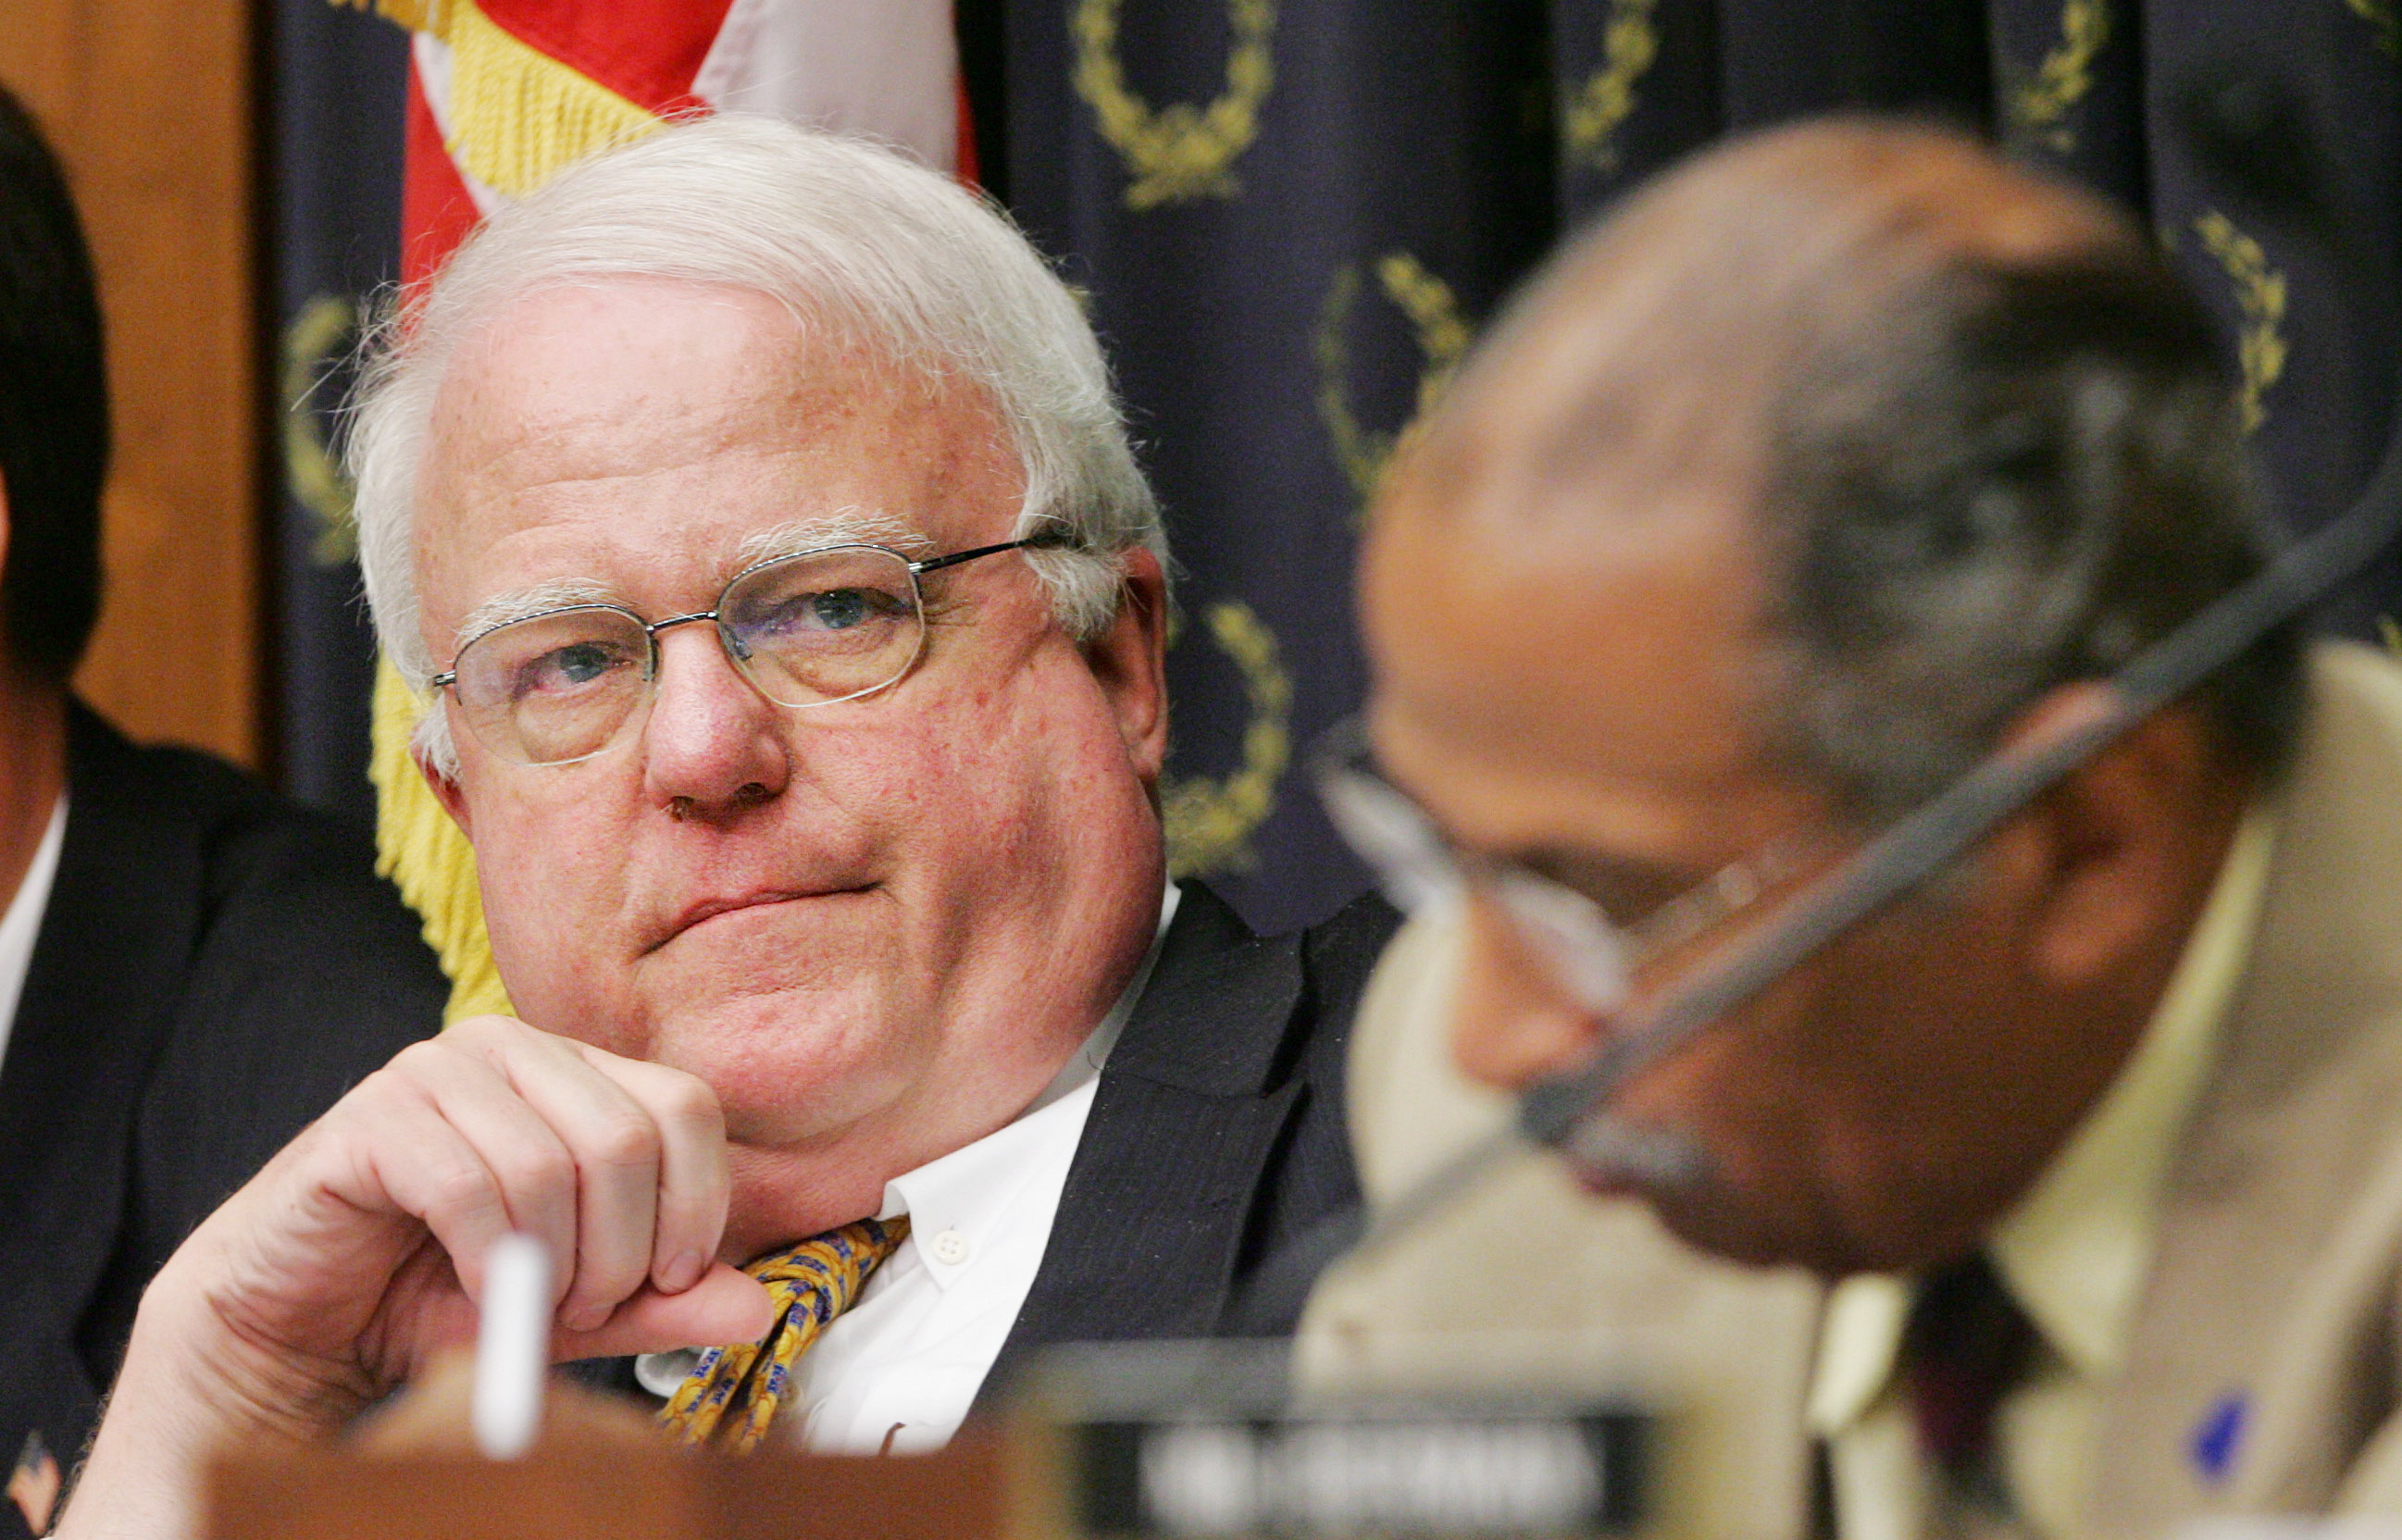 House Judiciary Committee Chairman Rep. James Sensenbrenner Jr., R-Wis., left, and ranking member Rep. John Conyers, D-Mich., participate in a committee markup hearing on Capitol Hill in Washington, Wednesday, Sept. 20, 2006.  (AP Photo/Manuel Balce Ceneta)